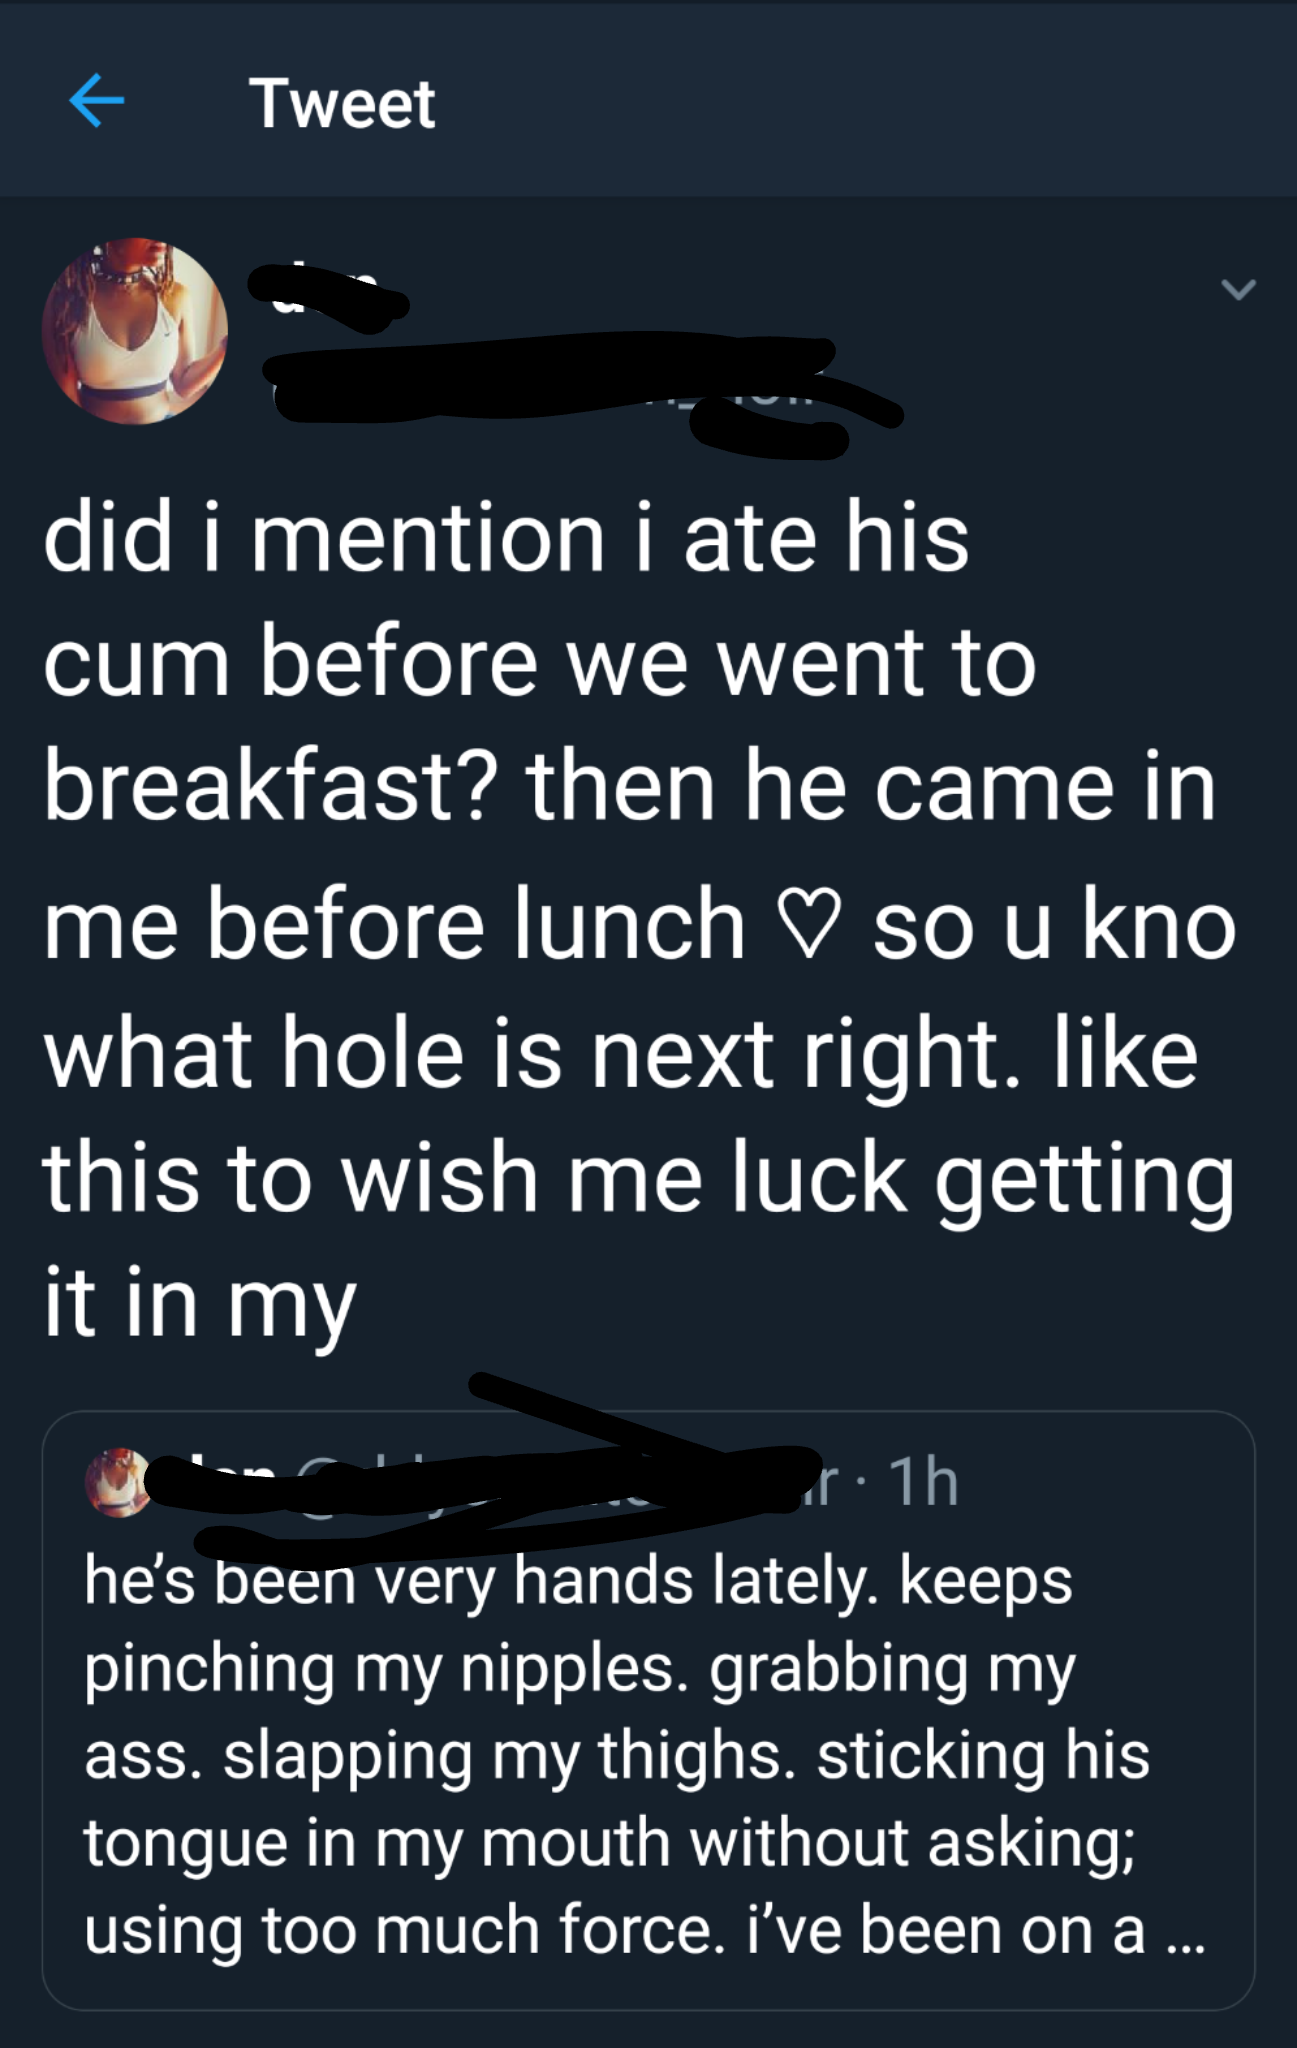 sex memes - Tweet did i mention i ate his cum before we went to breakfast? then he came in me before lunch so u kno what hole is next right. this to wish me luck getting it in my 1h he's been very hands lately. keeps pinching my nipples. grabbing my ass.